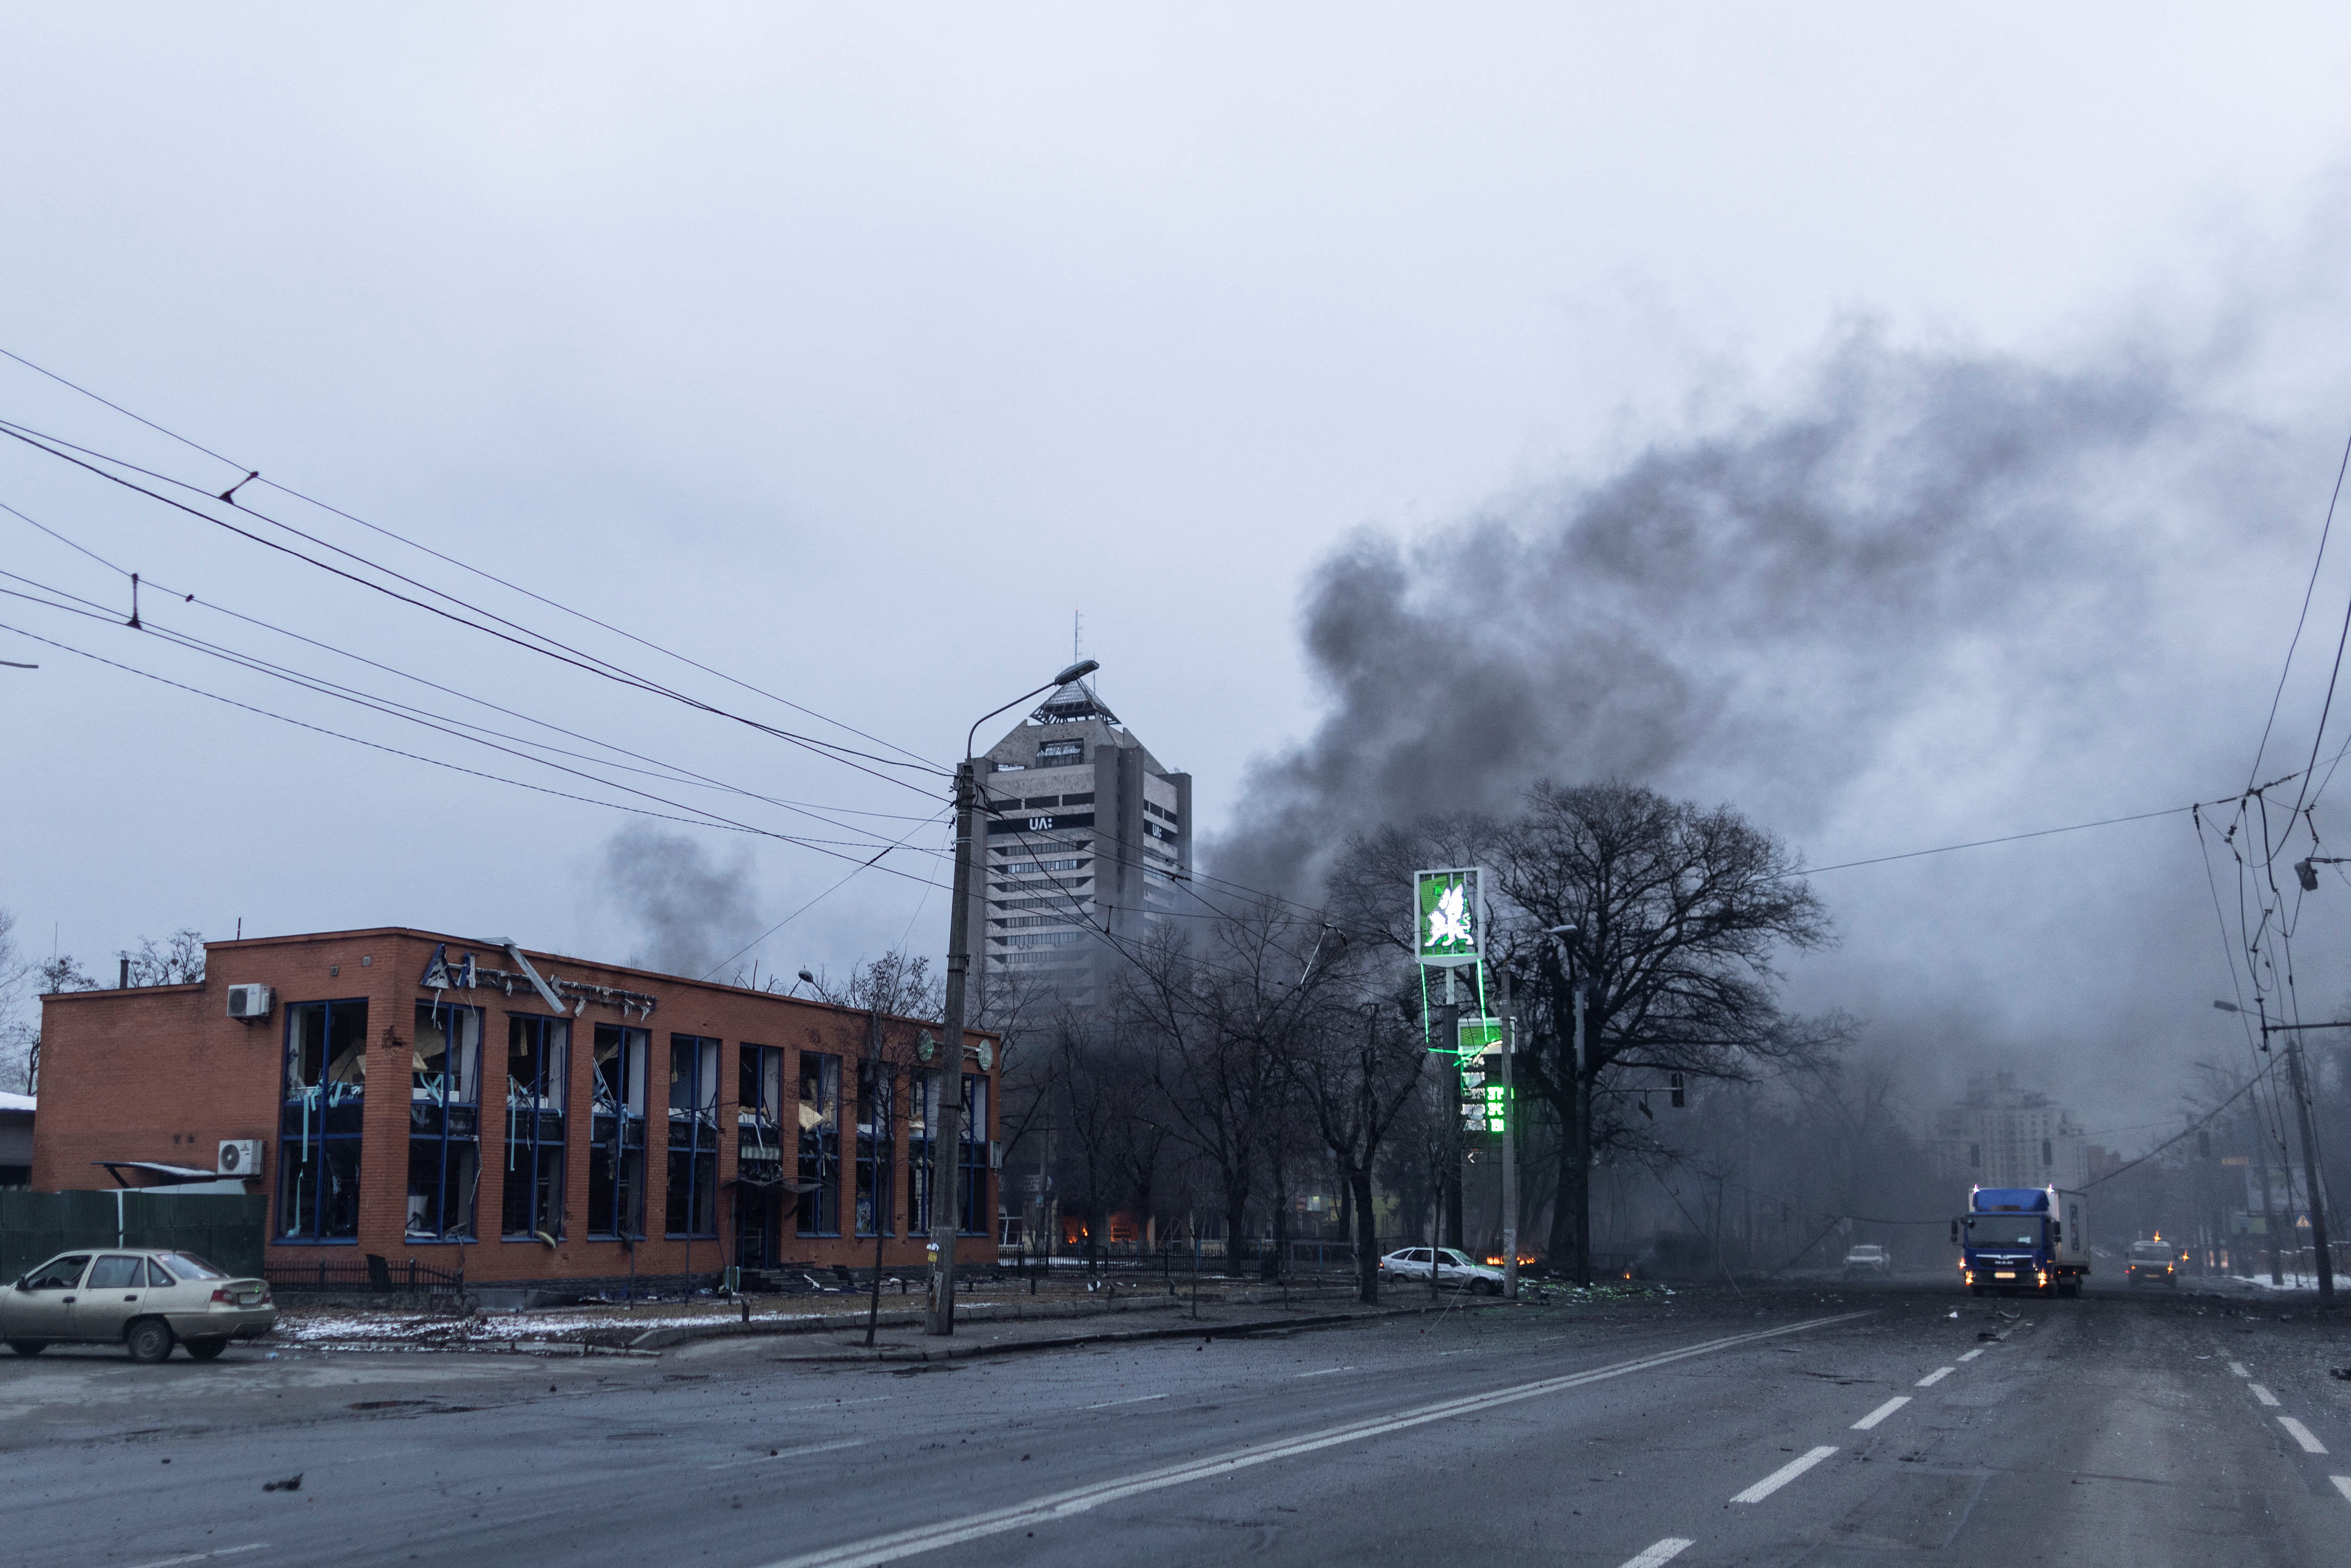 Smoke rises from a building after a blast, amid Russia's invasion of Ukraine, in Kyiv, Ukraine